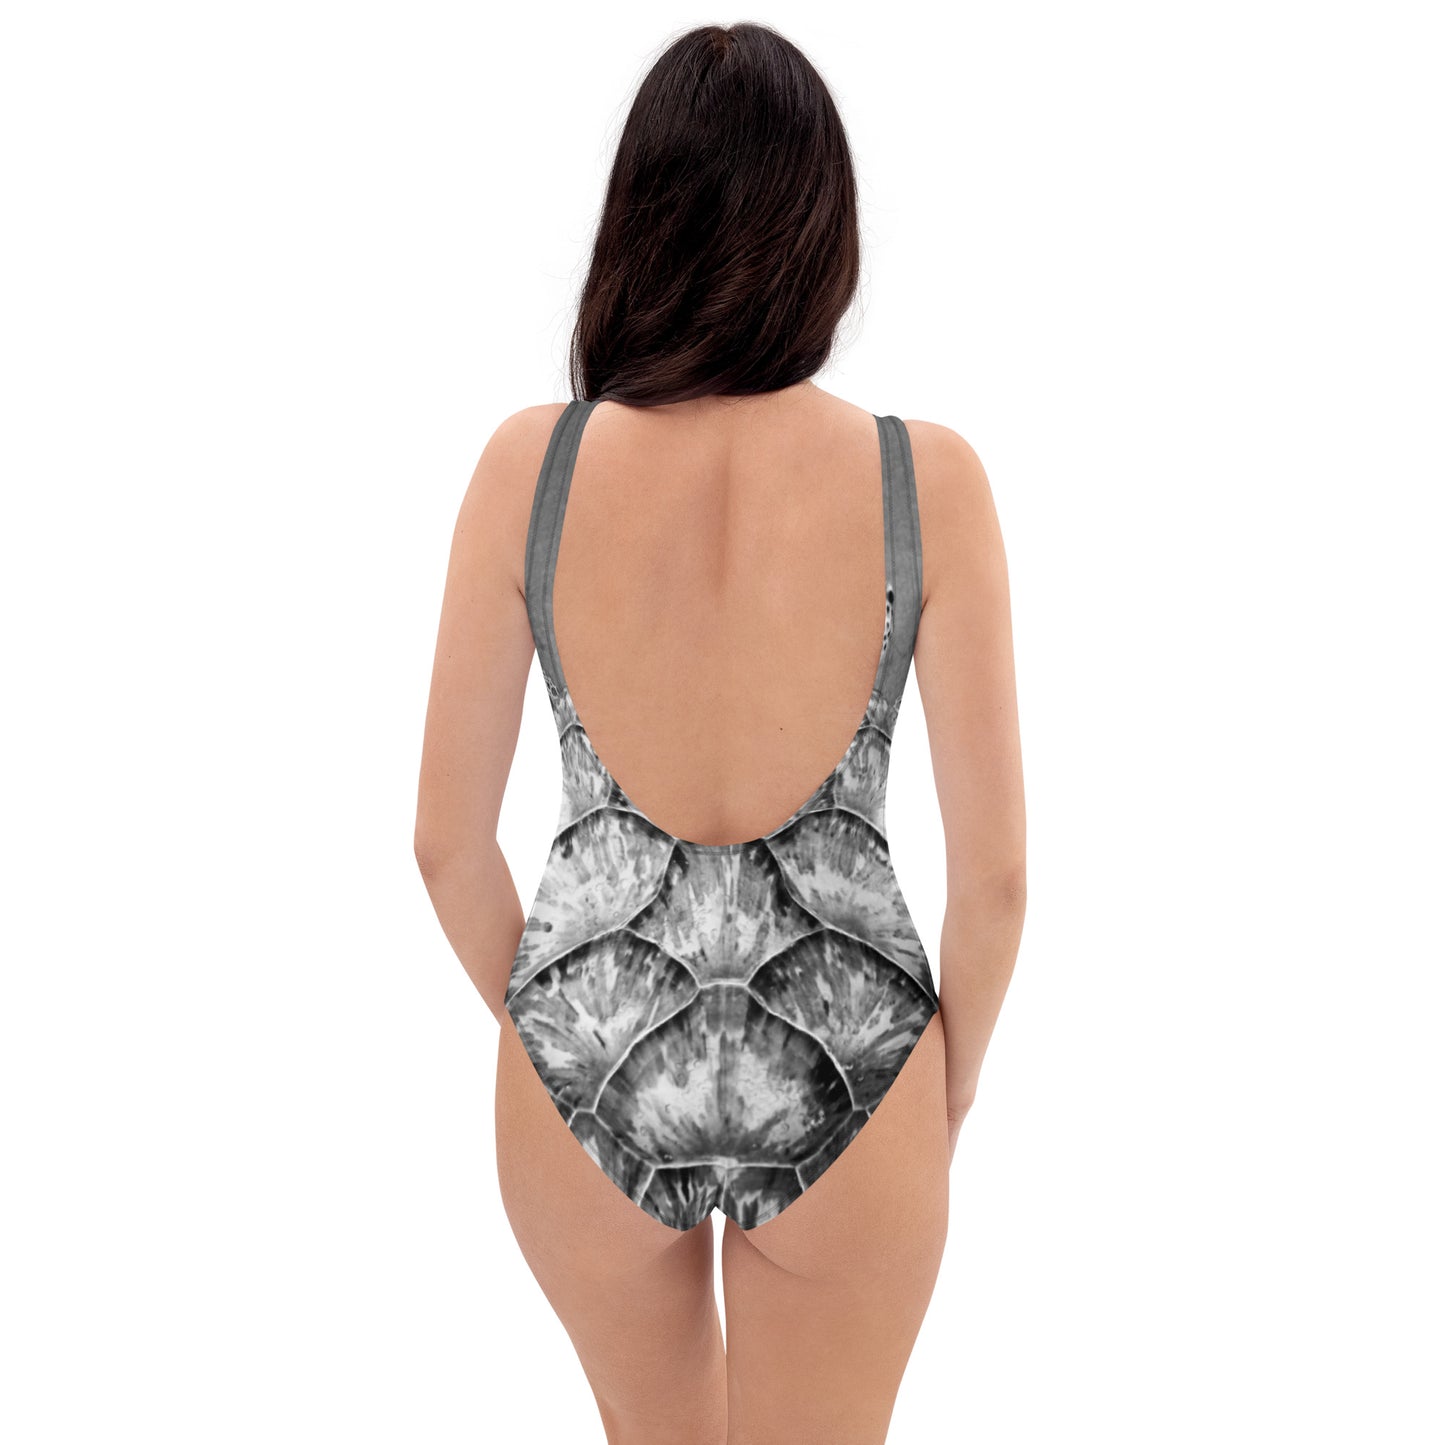 Rockley Black and White Swimsuit